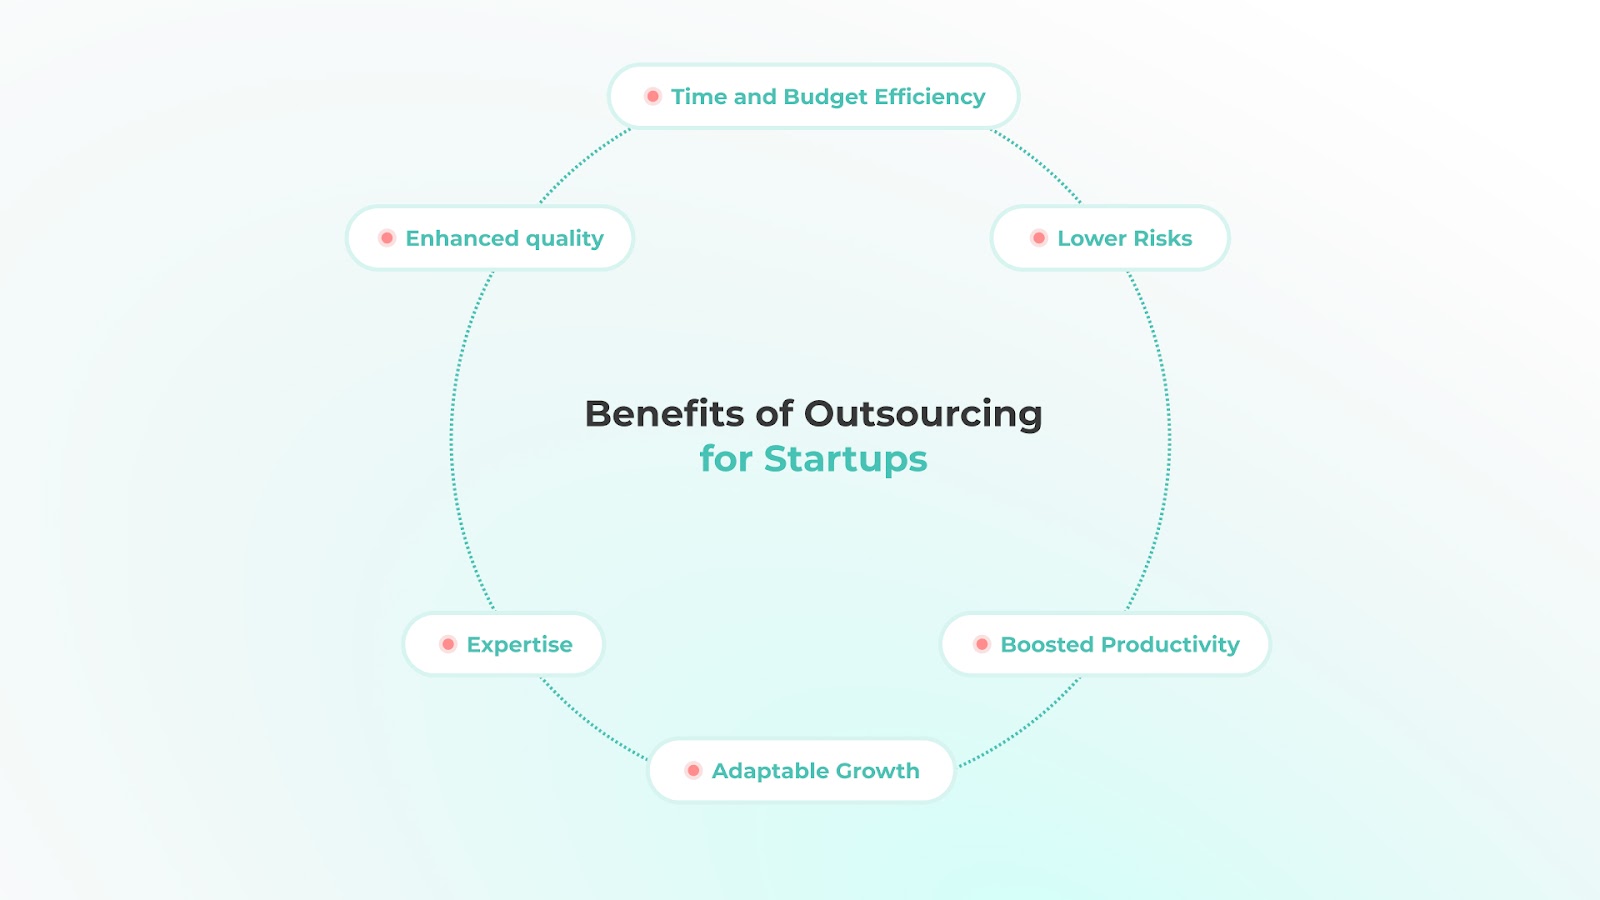 Benefits of Outsourcing for Startups: Enhanced Quality, Time and Budget Efficiency, Lower Risks, Boosted Productivity, Expertise, Adaptable Growth